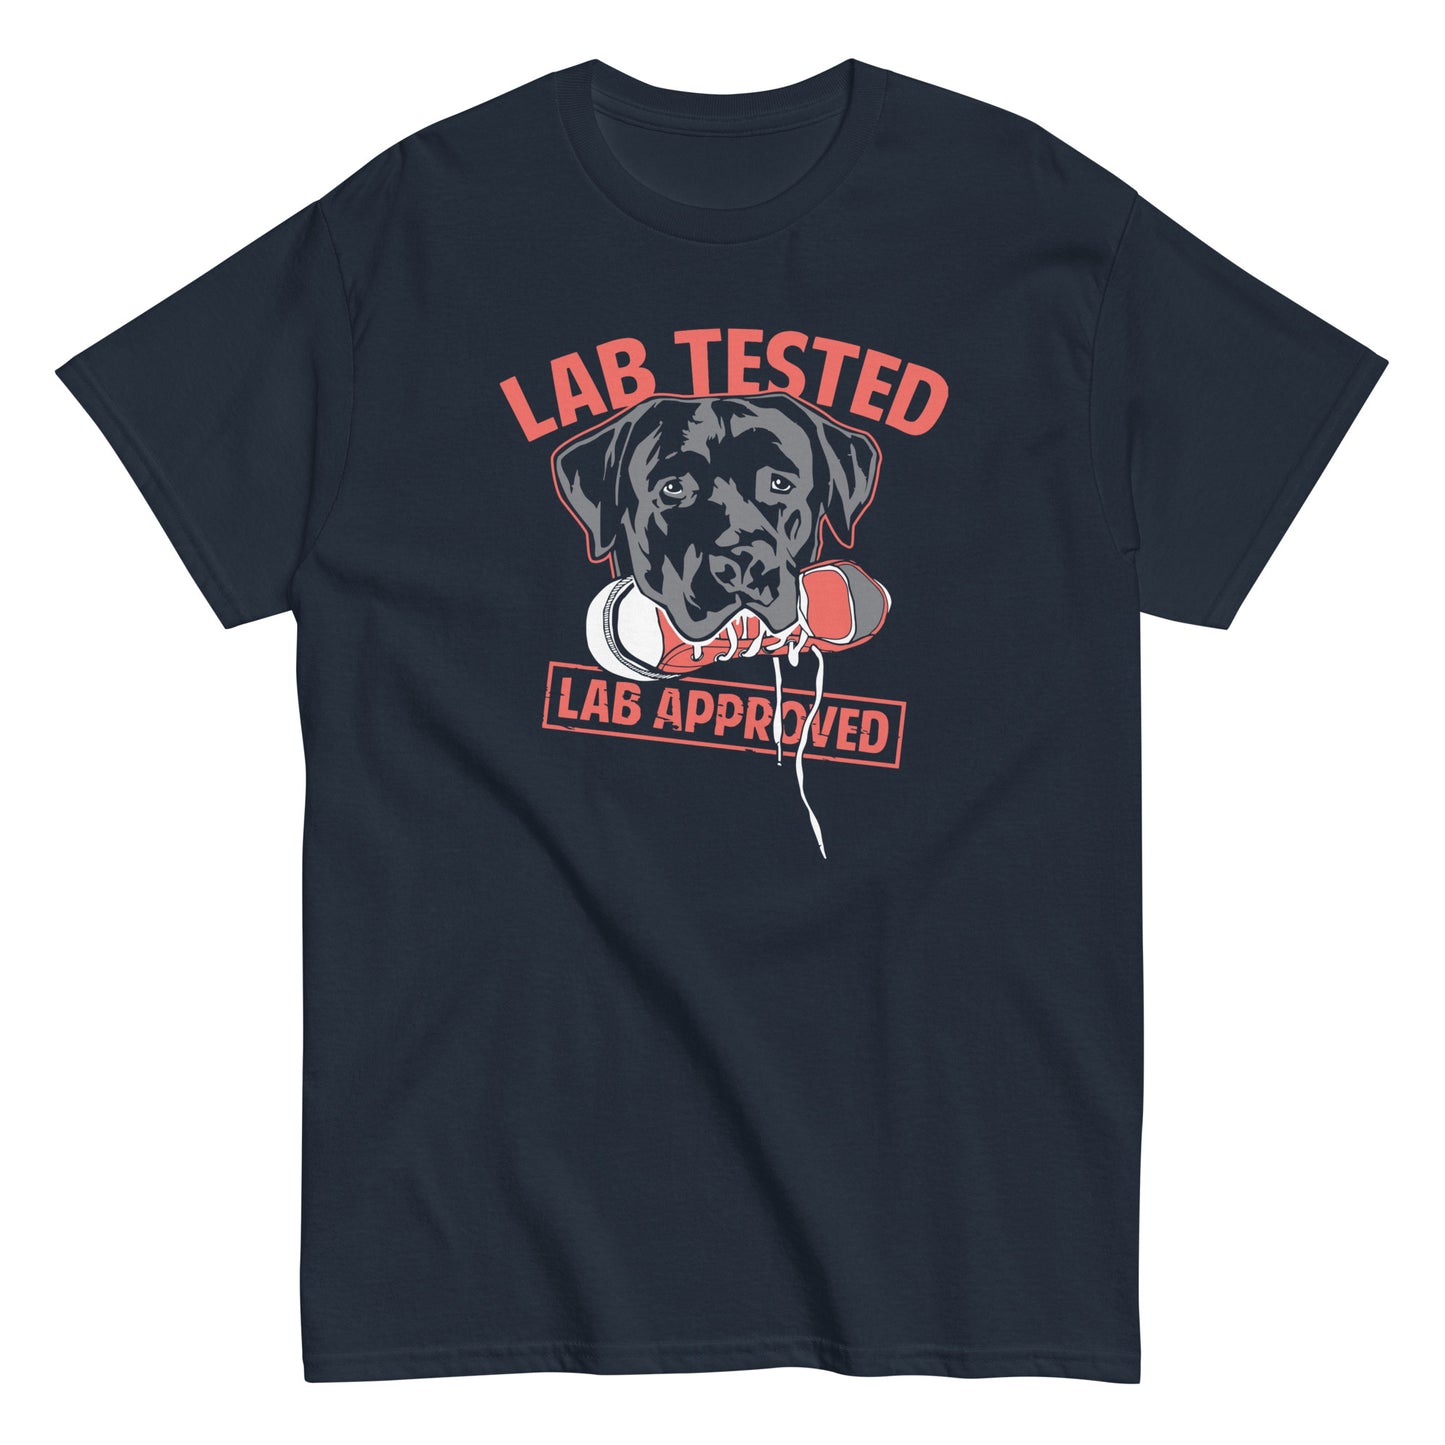 Lab Tested, Lab Approved Men's Classic Tee